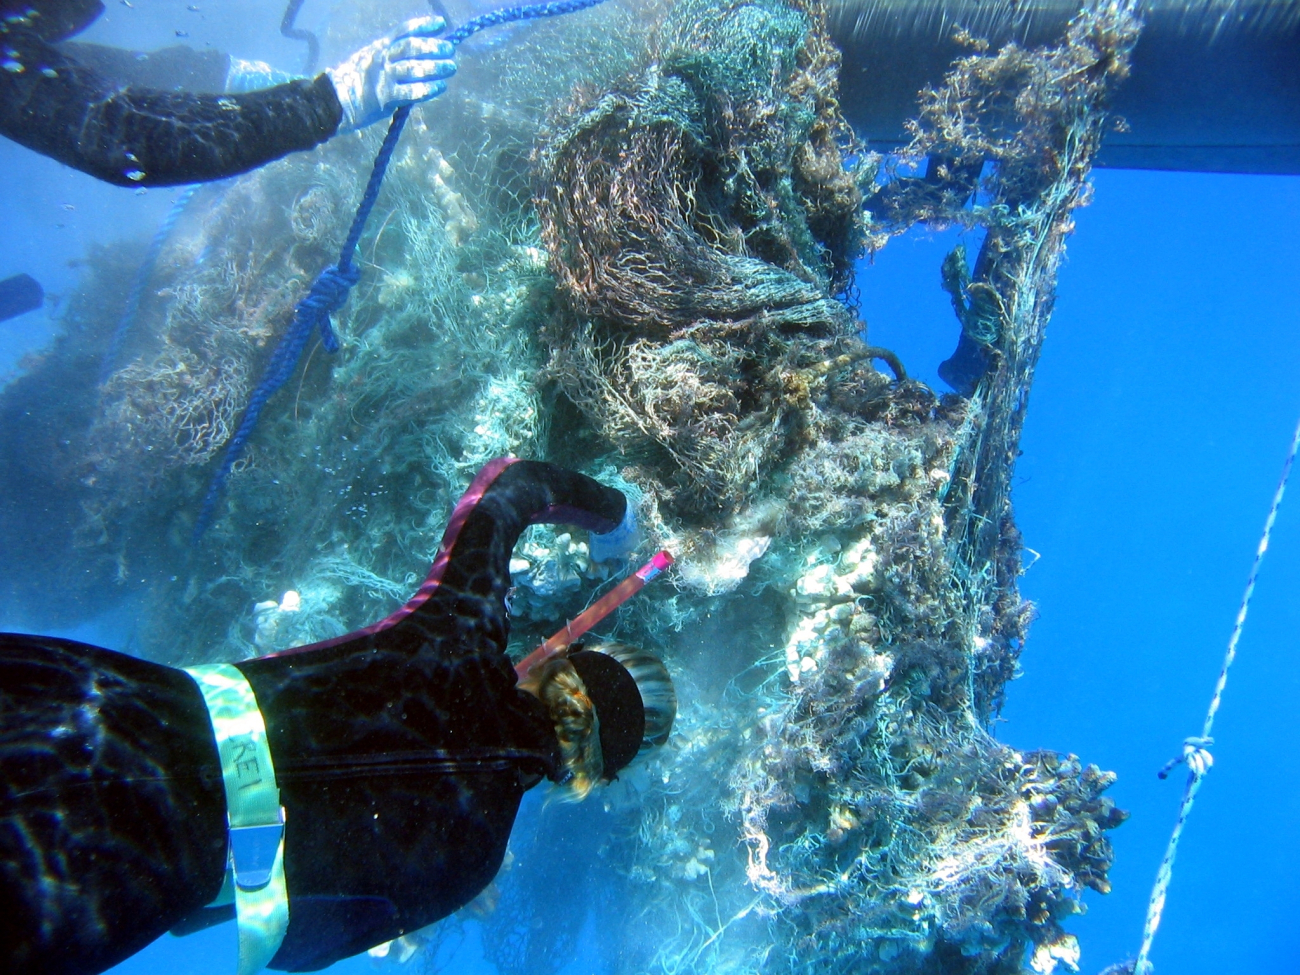 Cutting out heavy reef substrate material from derelict net prior to liftingonto inflatable boat for transport to CASITAS